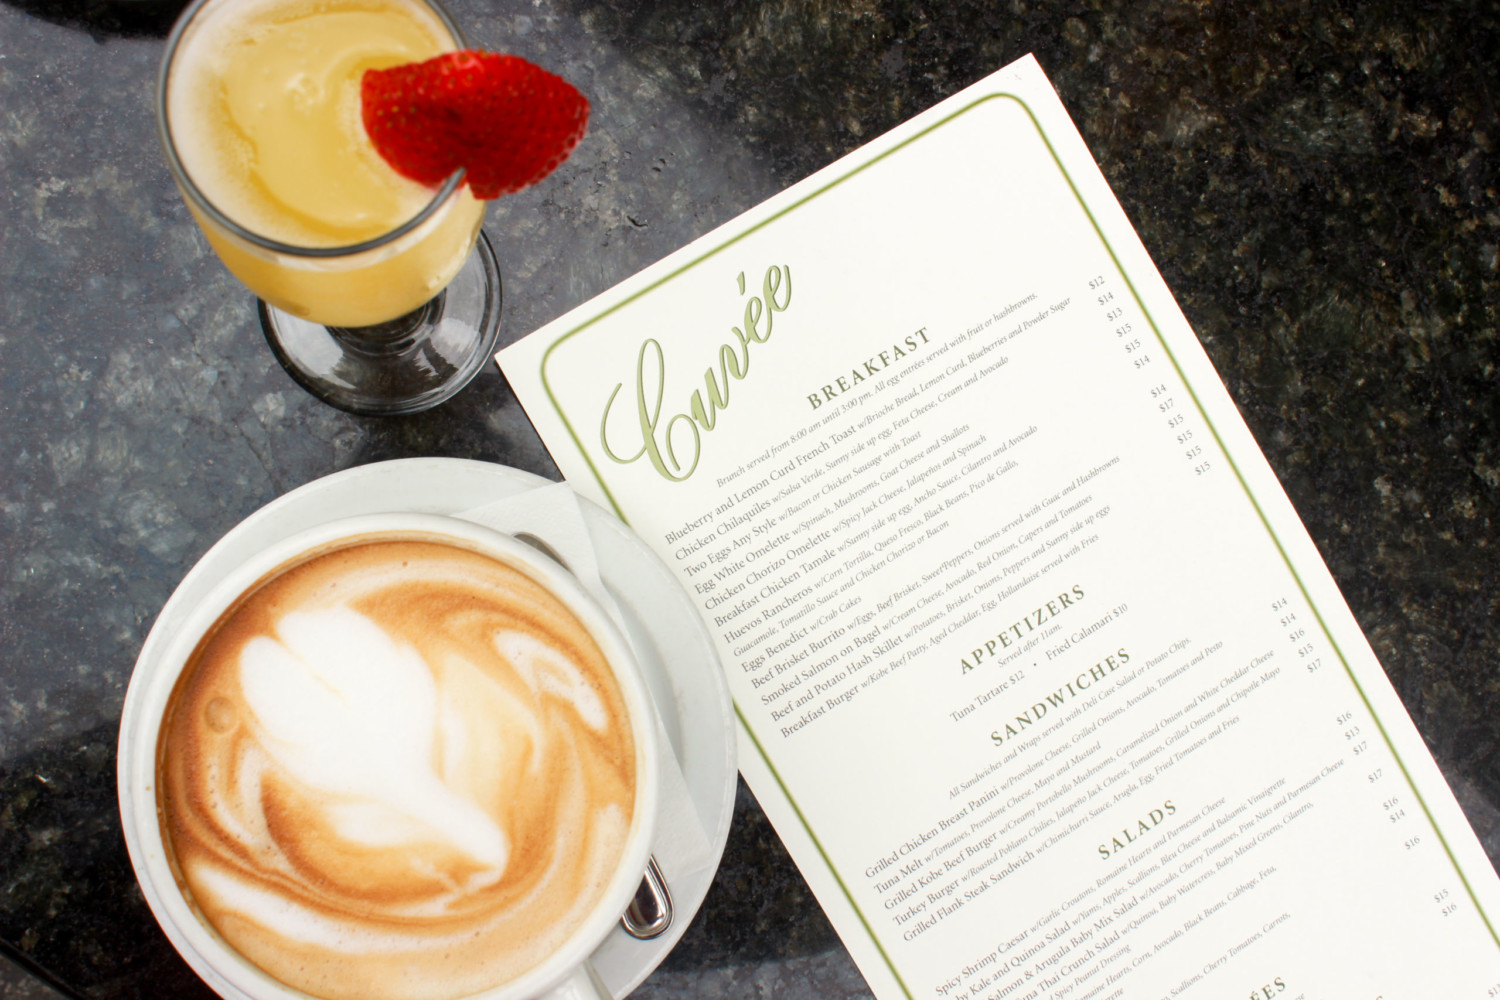 A photo featuring the Cuvee Menu, beside it is a fruit drink and a cup of coffee.